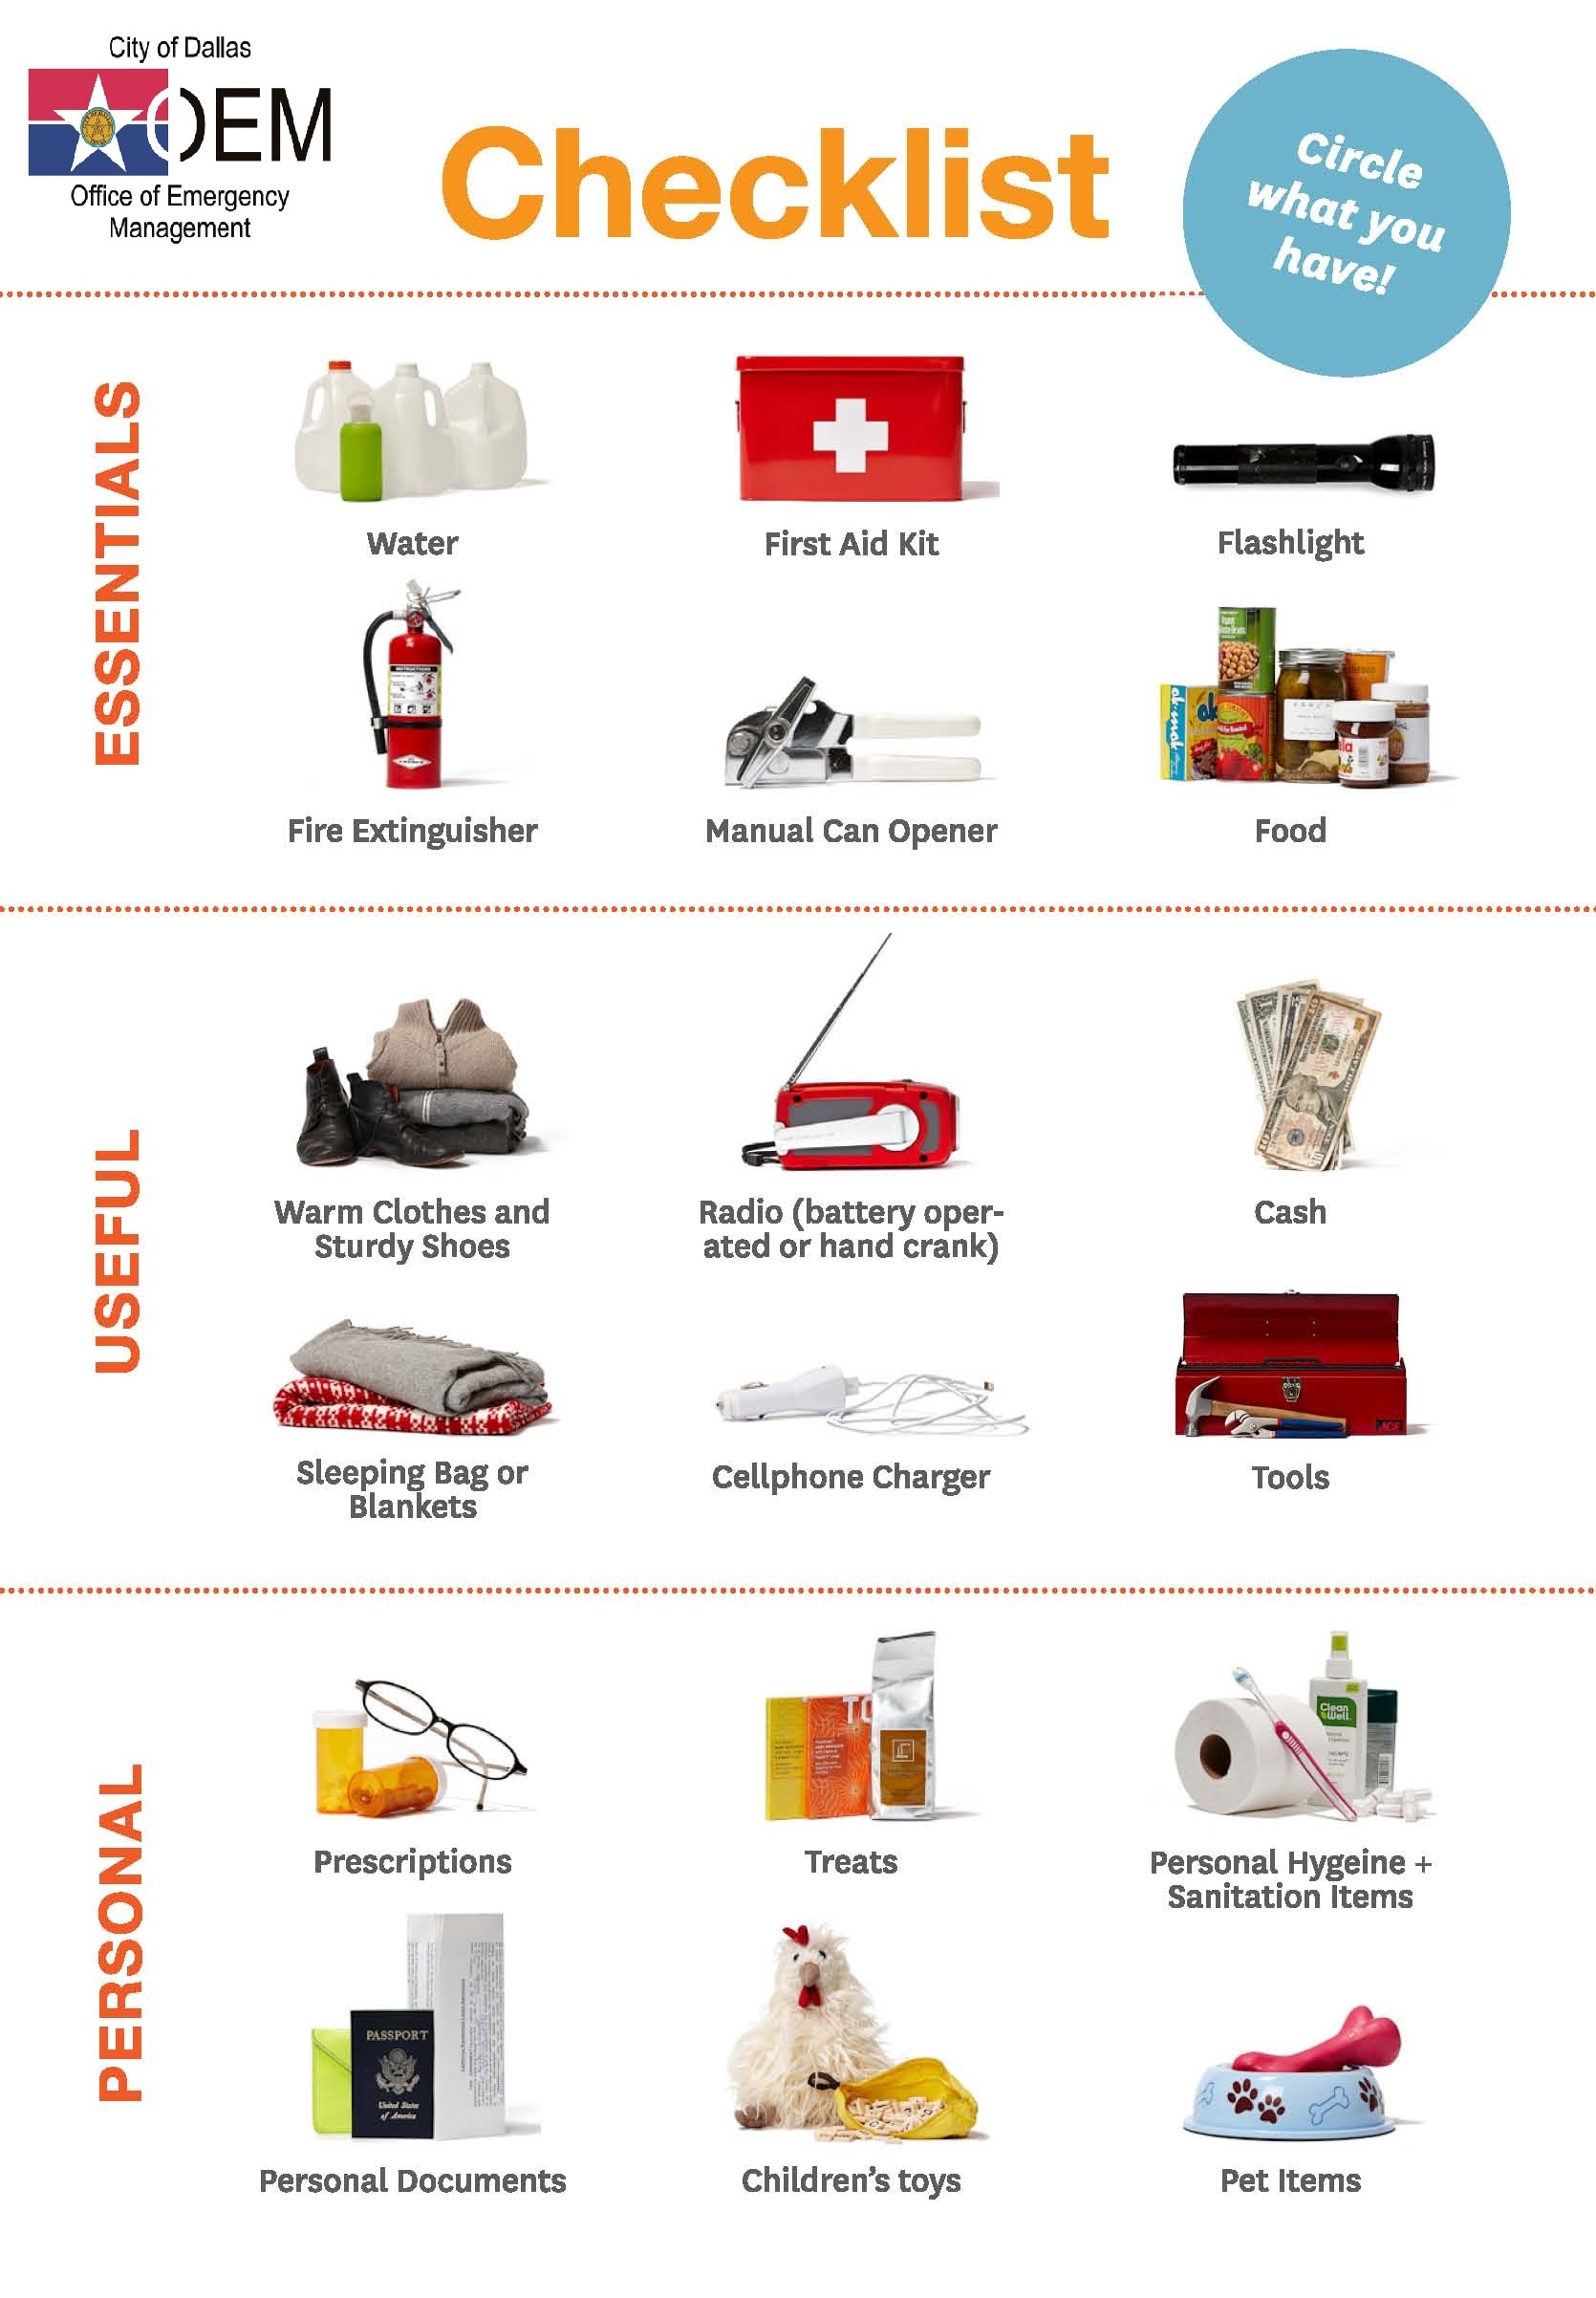 Do you have an Emergency Disaster Kit? - Dallas City News